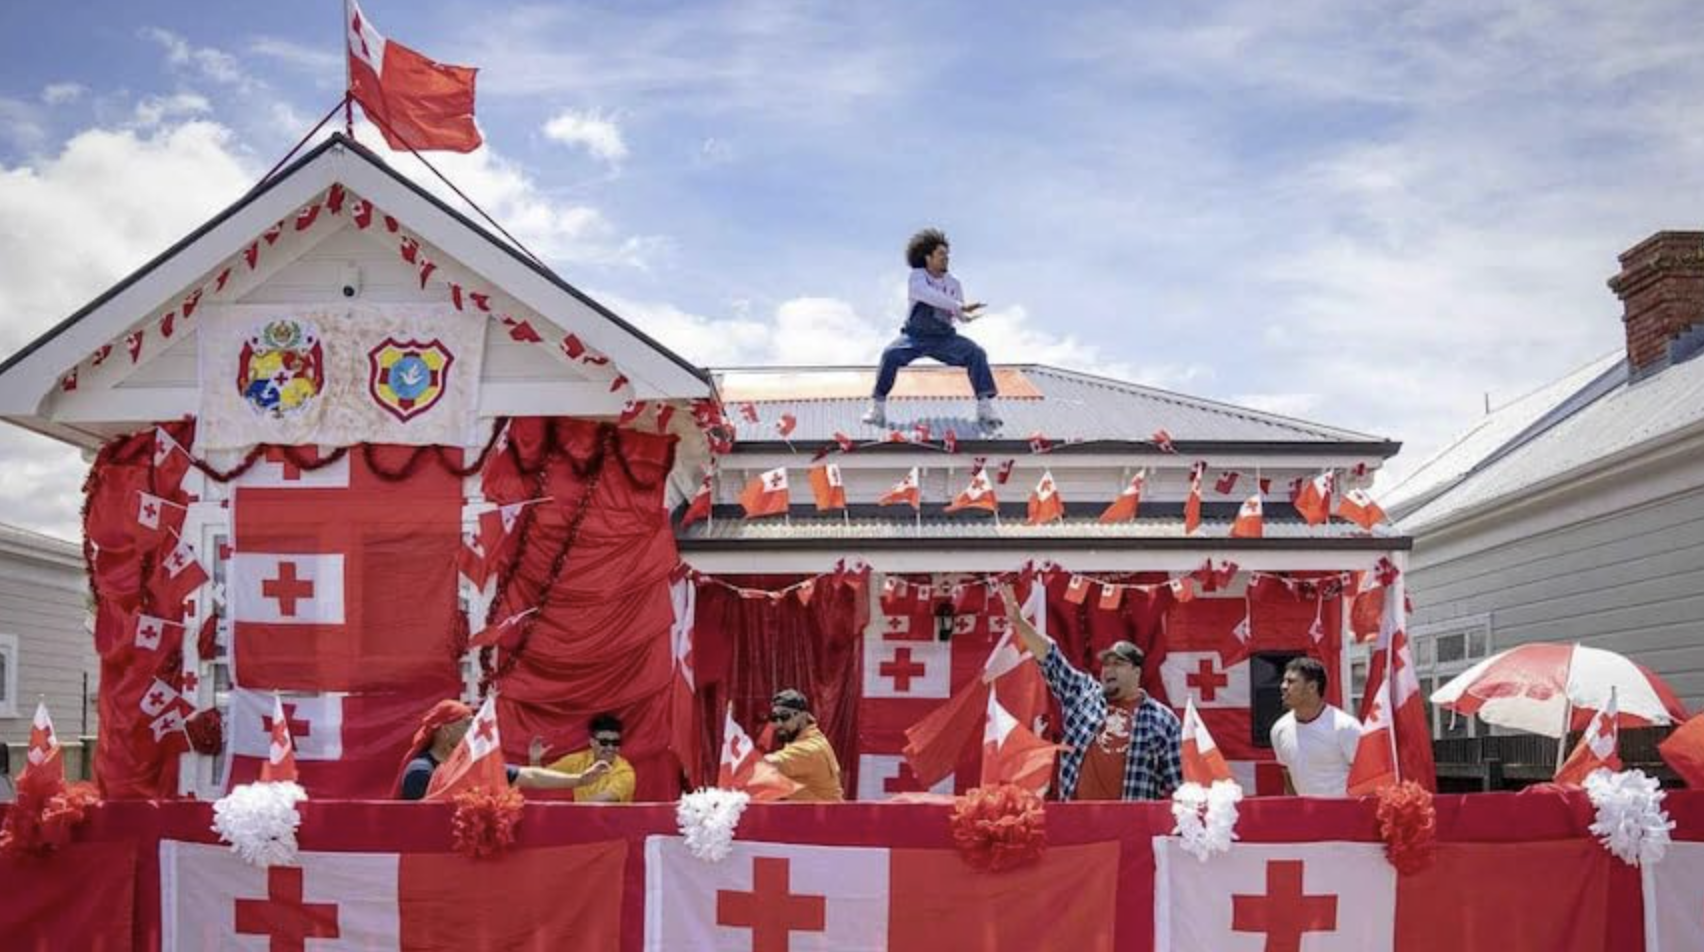 Image of a house covered in the red and white flags of Tonga